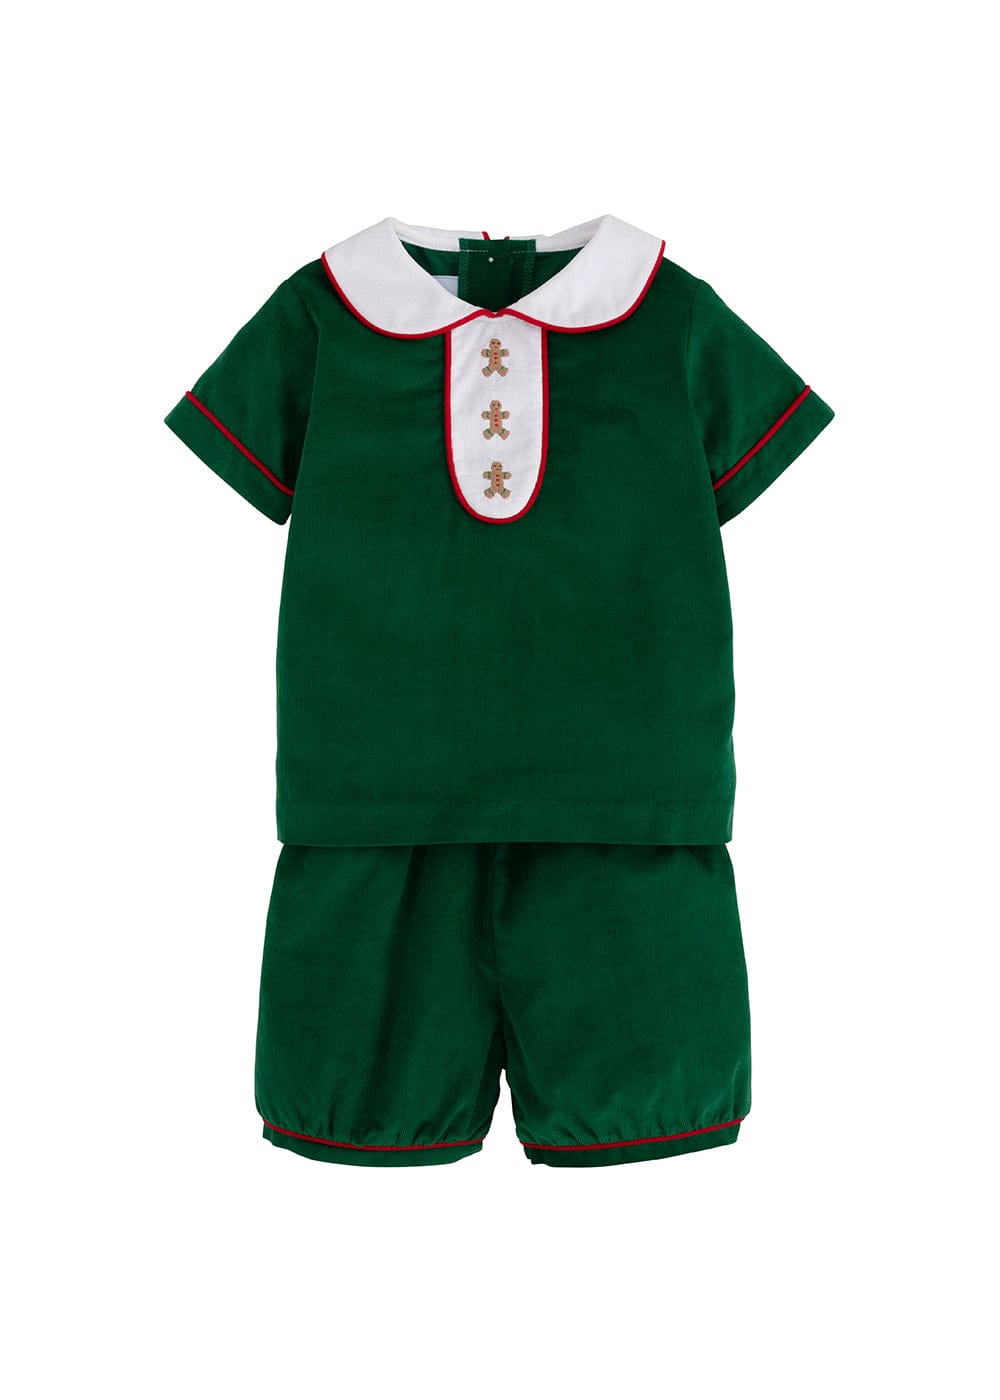 classic childrens clothing evergreen corduroy shirt and short set with gingerbread detail, peter pan collar, and red piping detailing